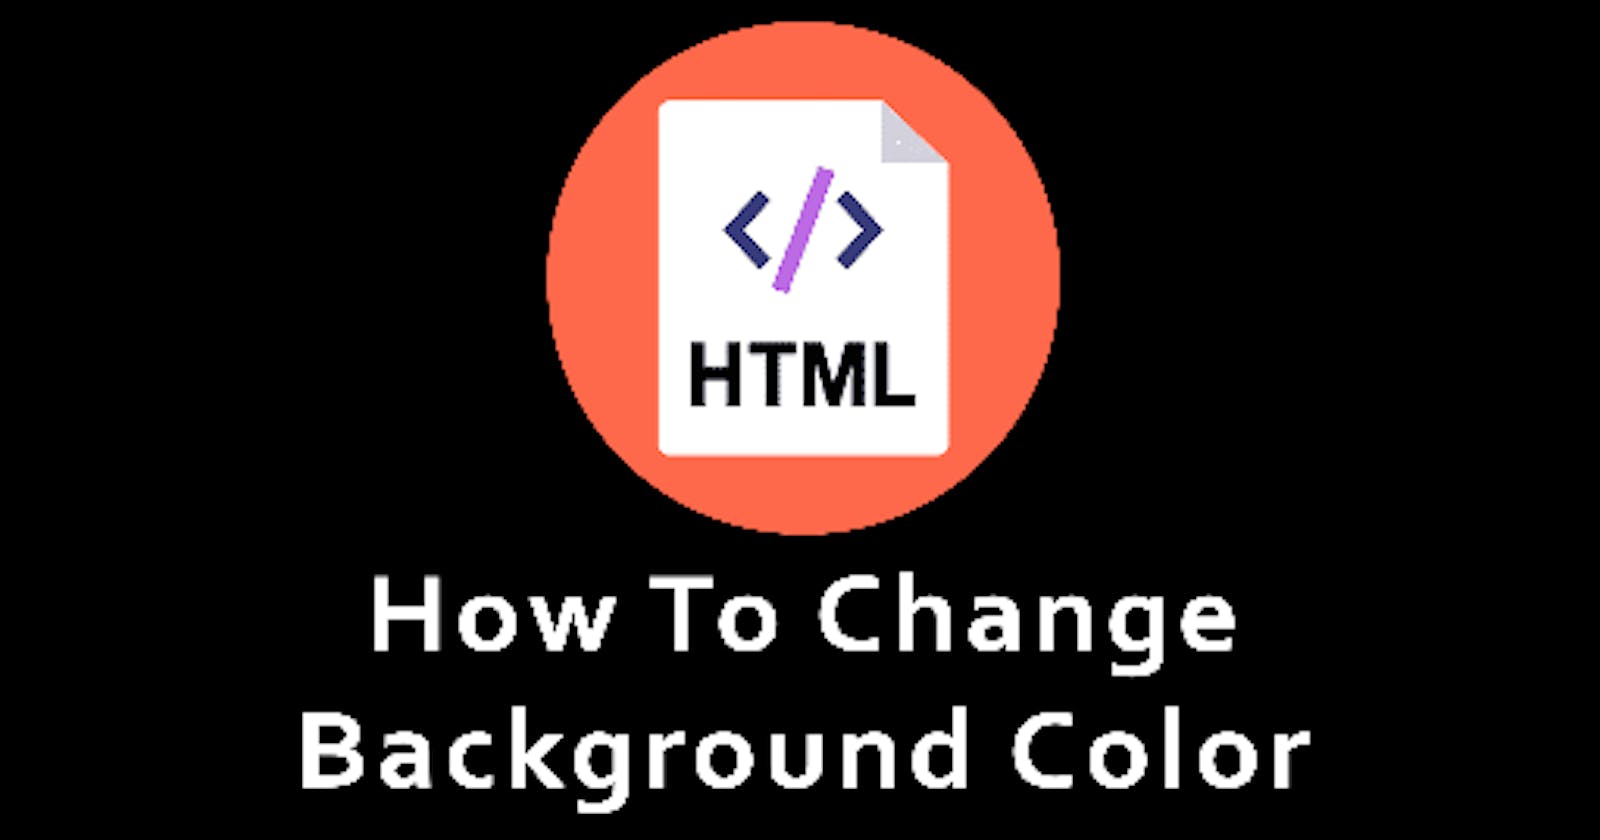 How to change background color in HTML